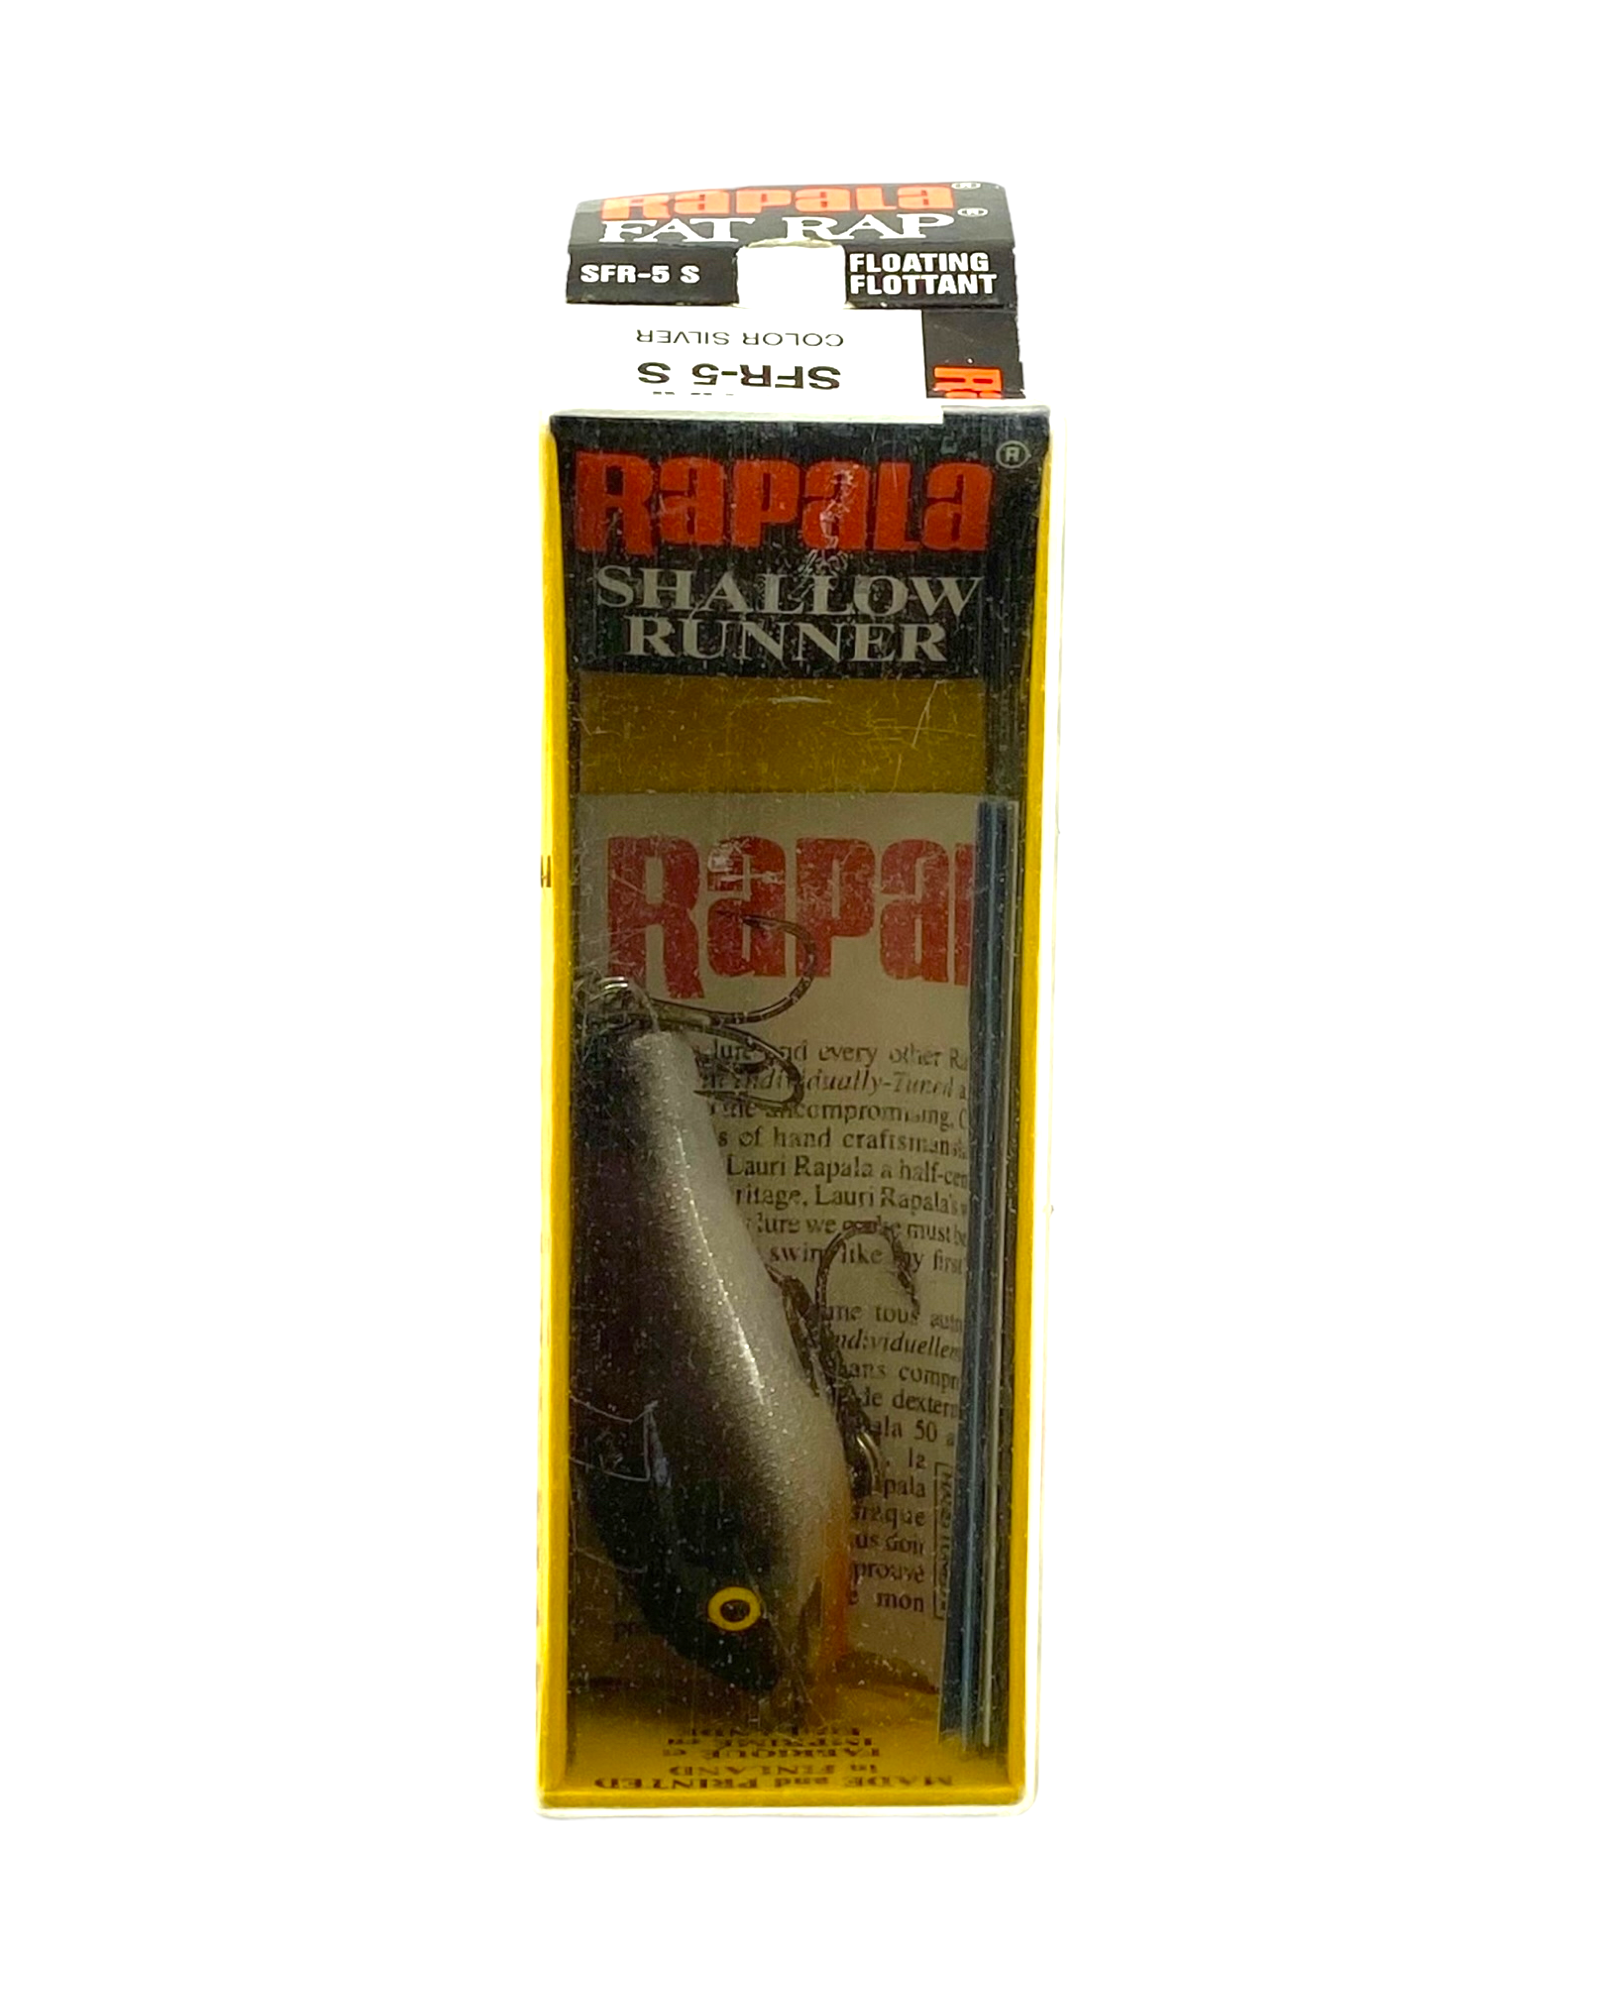 Finland • RAPALA FAT RAP Size 5 Fishing Lure — SILVER – Toad Tackle